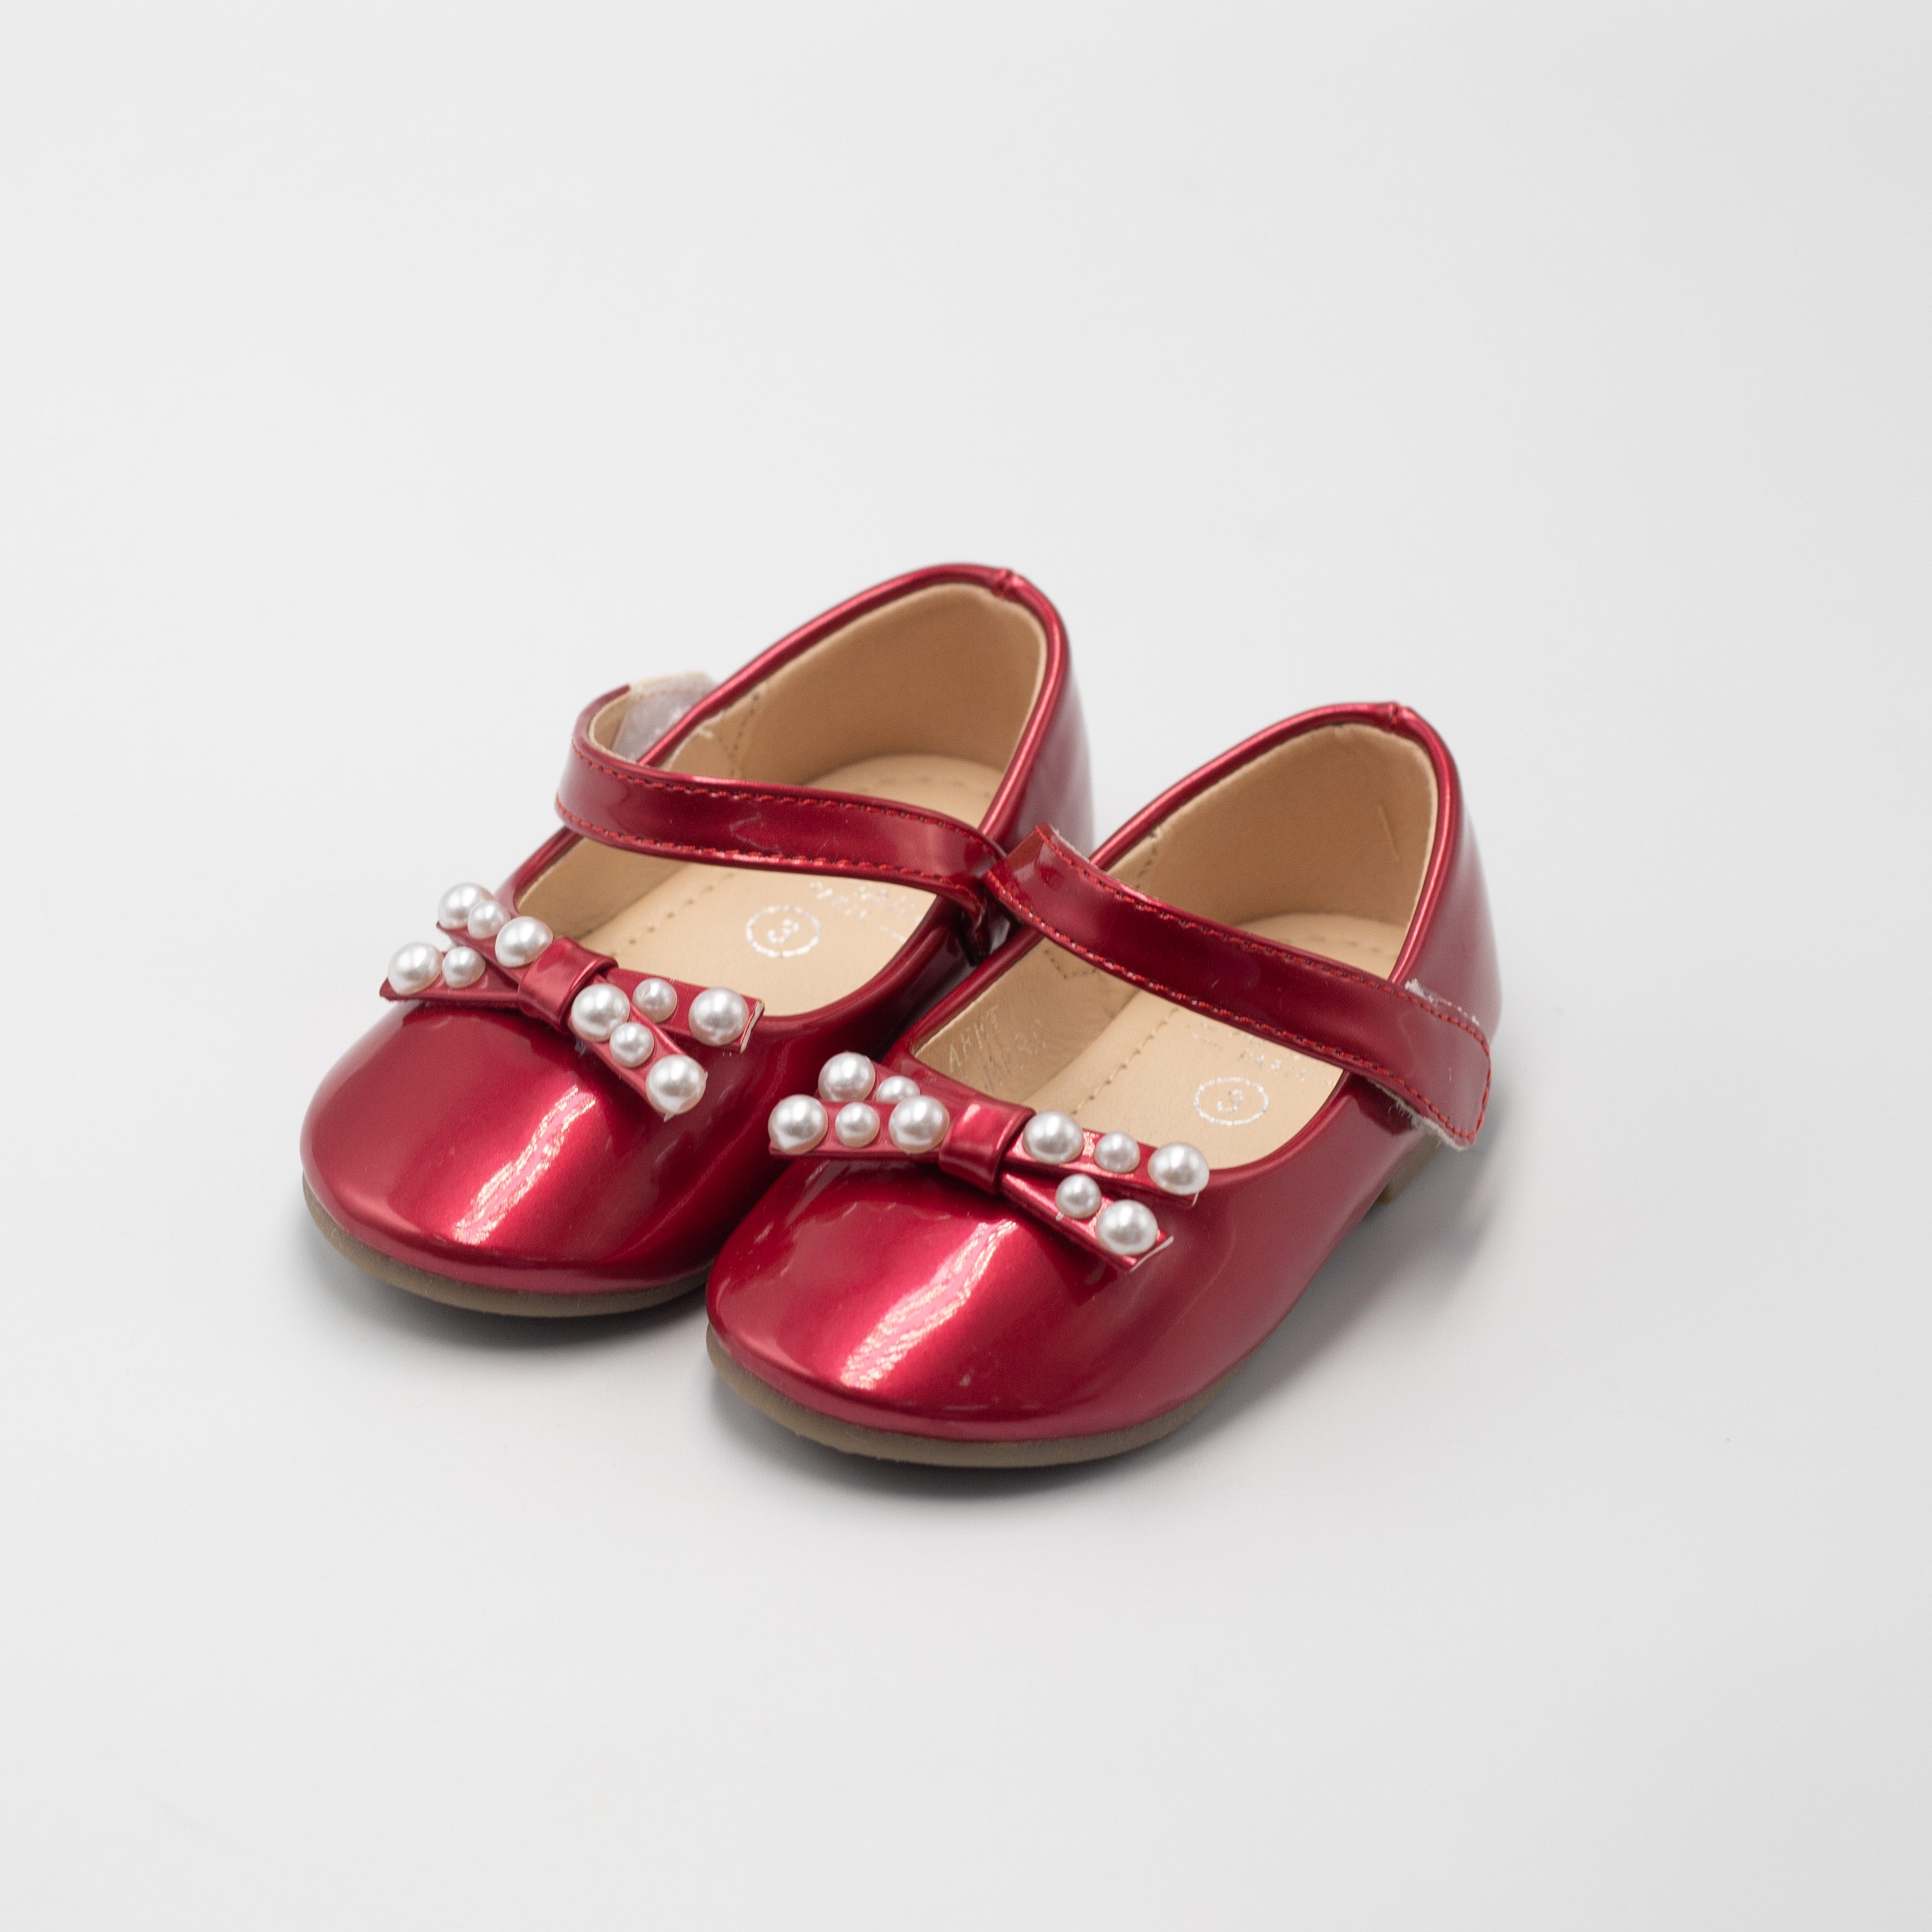 Afet infant girls patent pump with pearl on a bow red